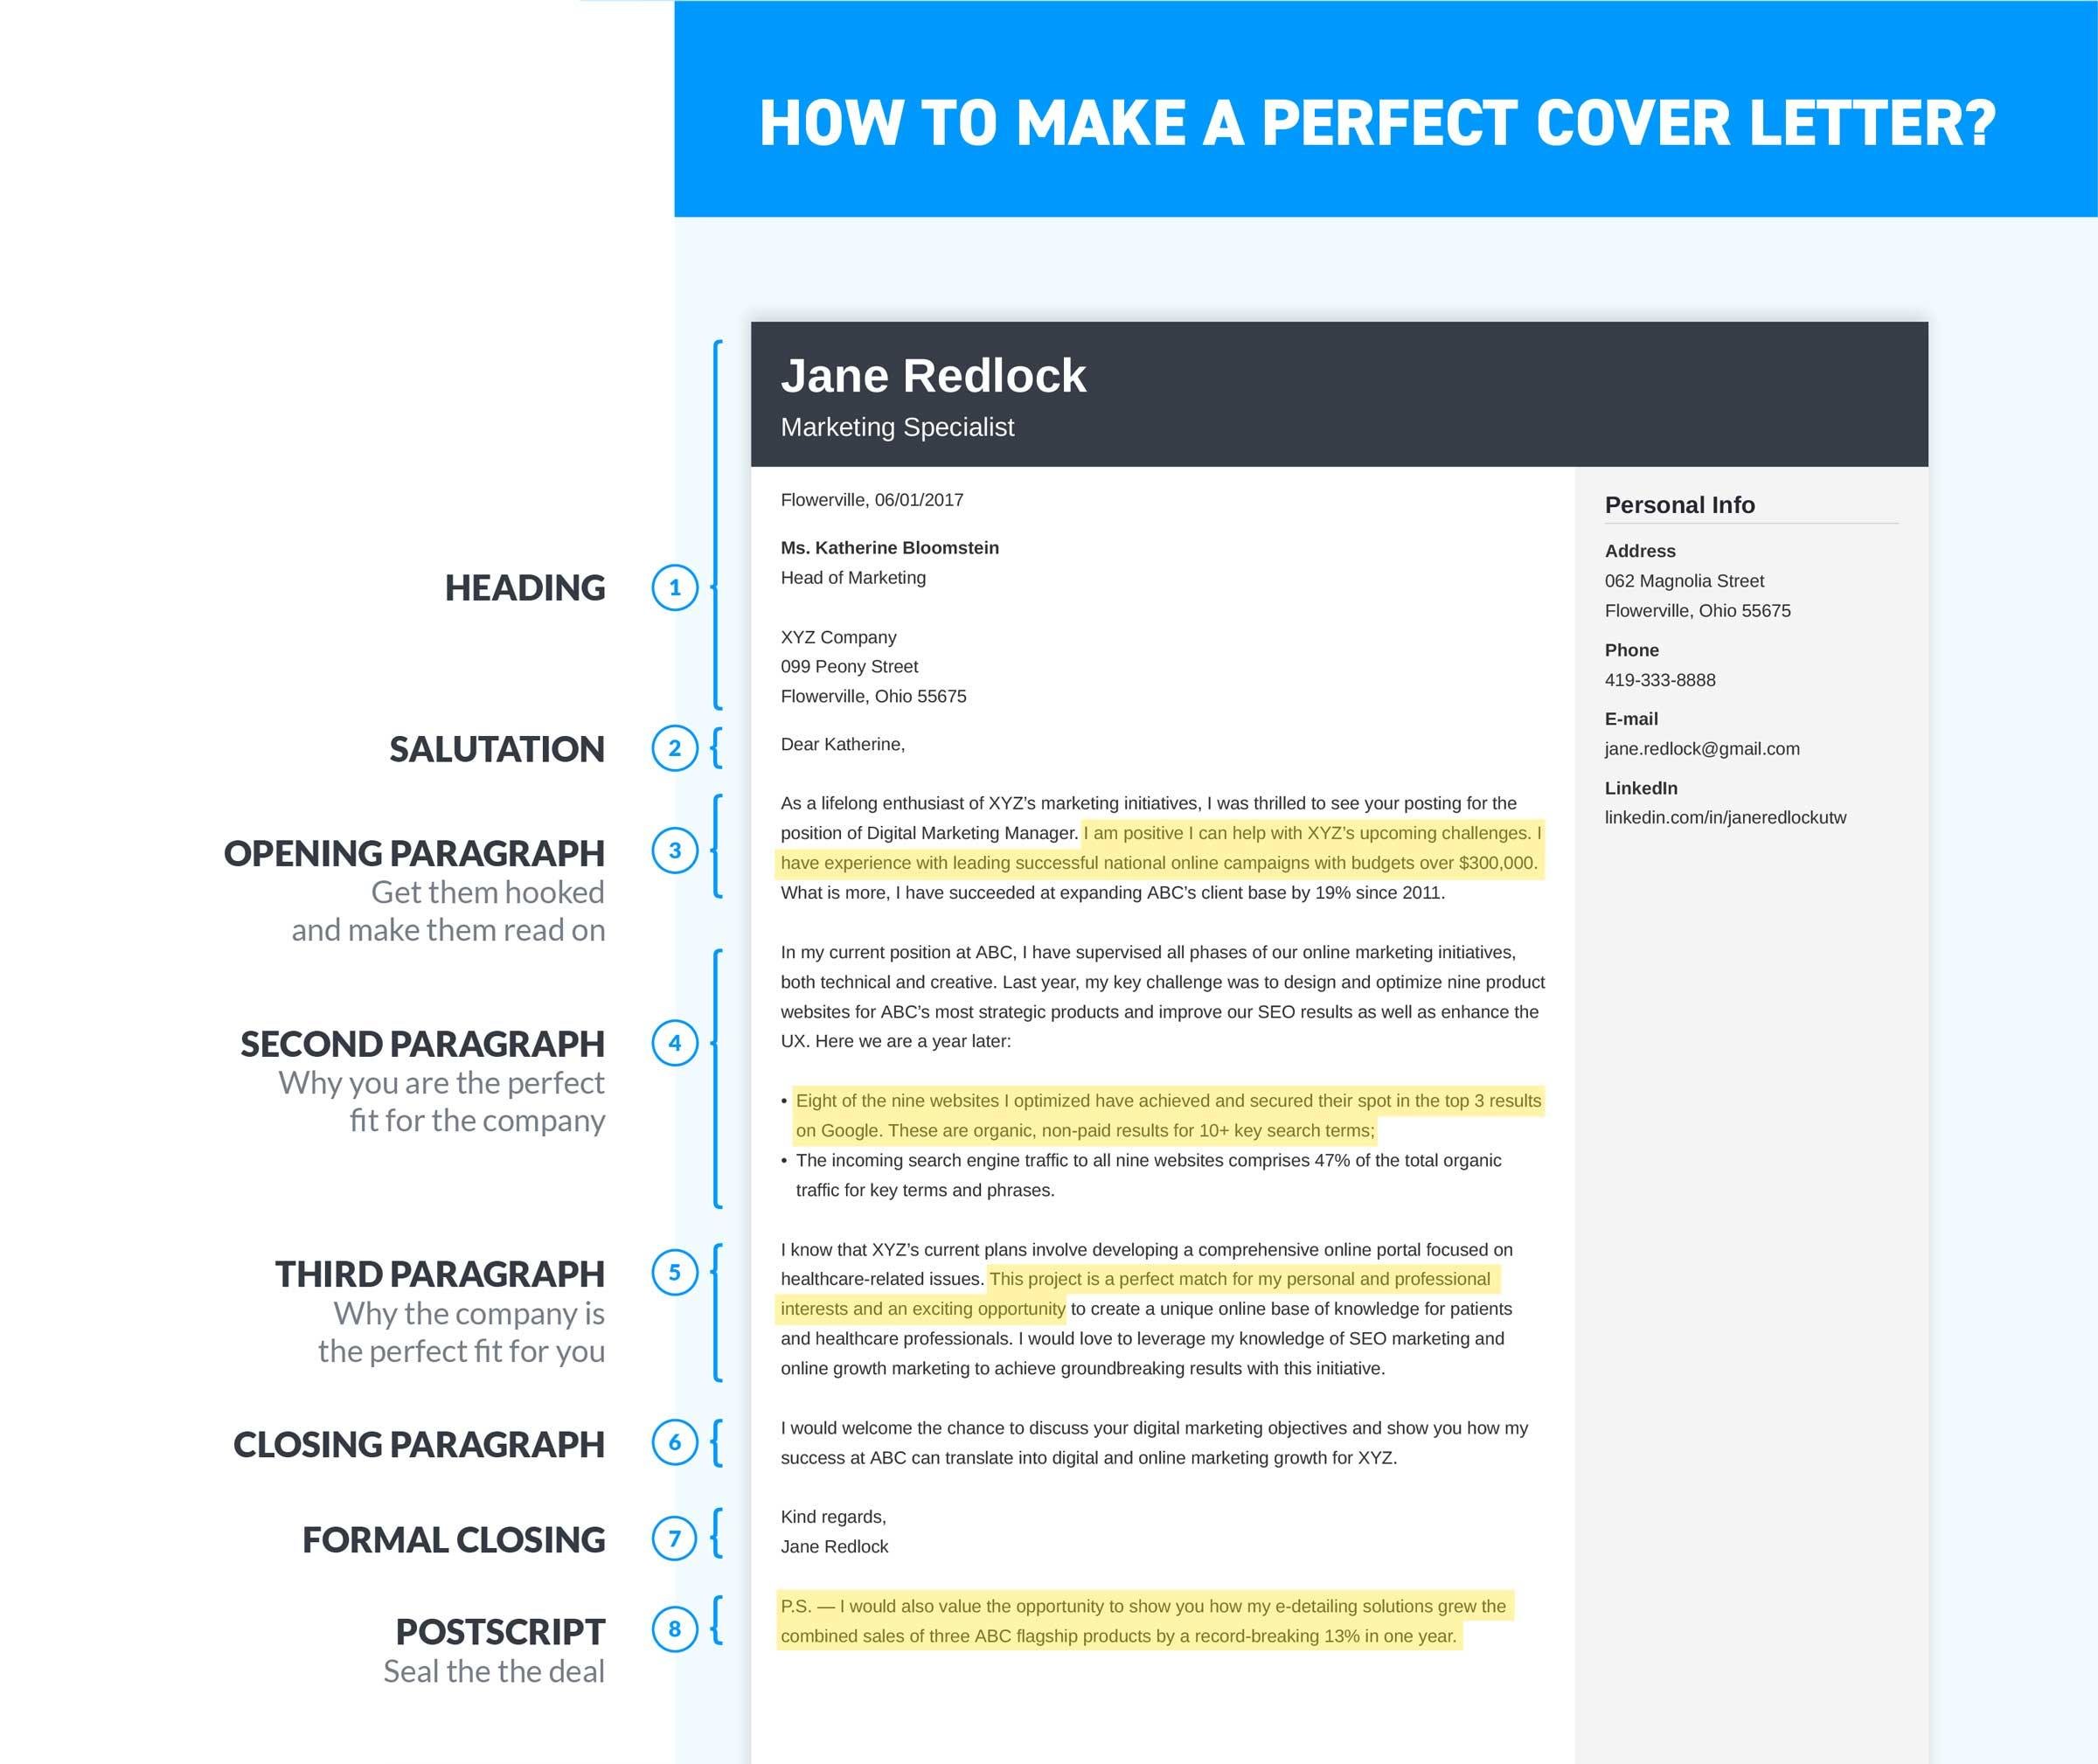 How to Write a Cover Letter That Gets You an Offer